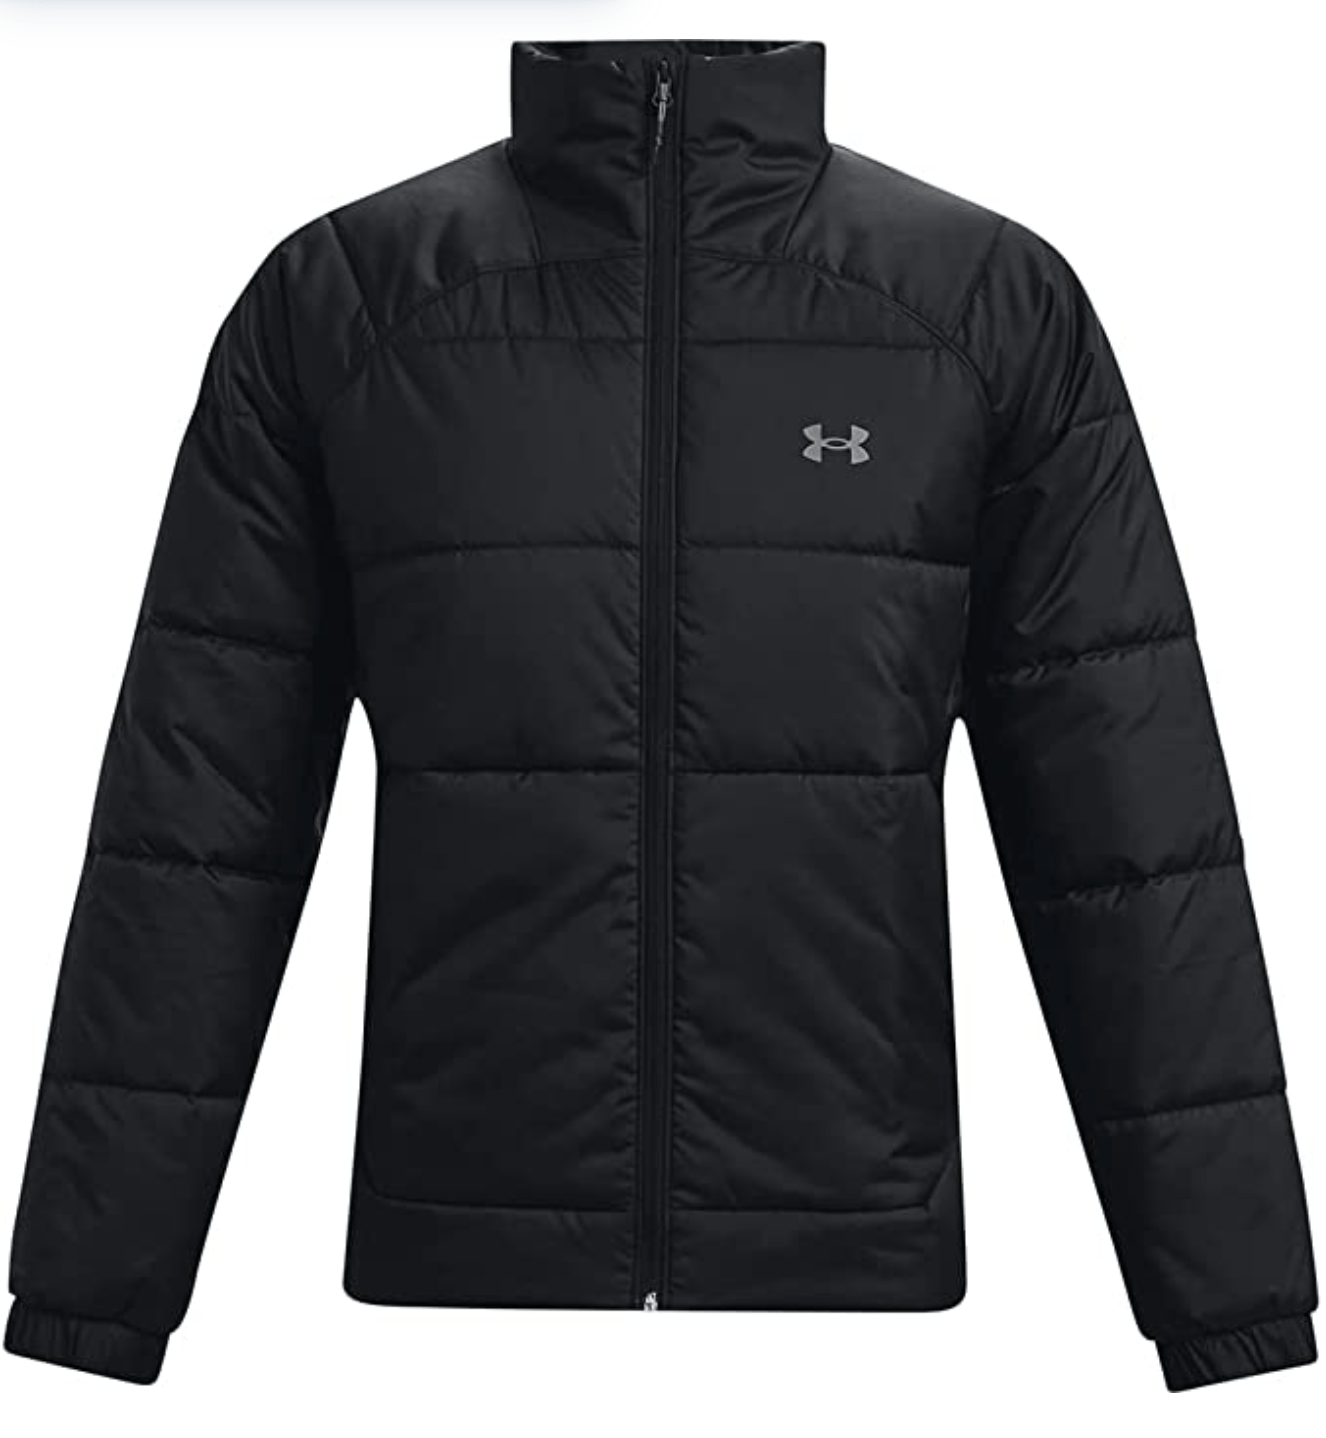 Under Armour Under Armour Men's Insulate Jacket Black Large